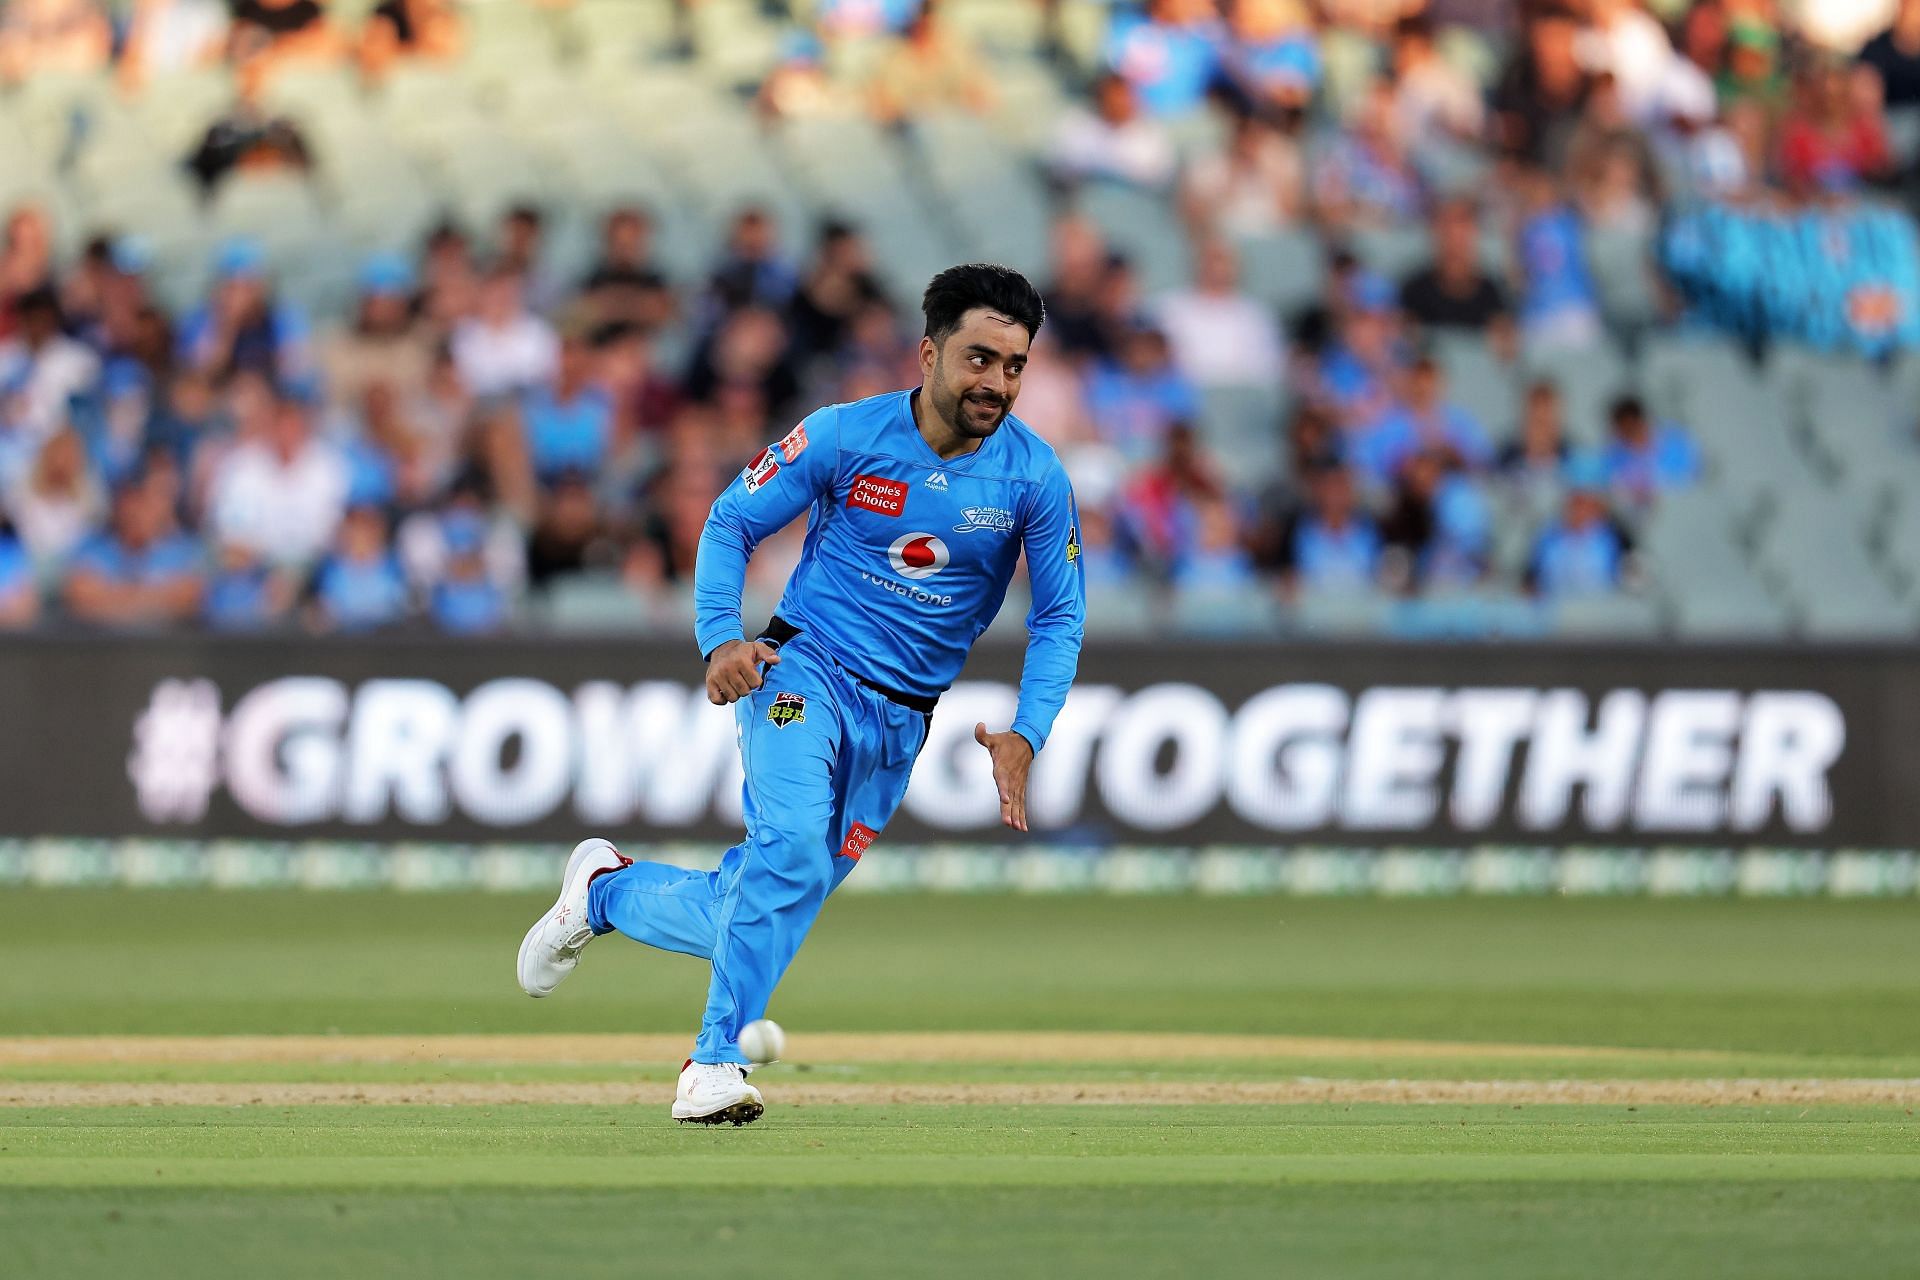 Rashid Khan could well be the highest-paid spinner in IPL